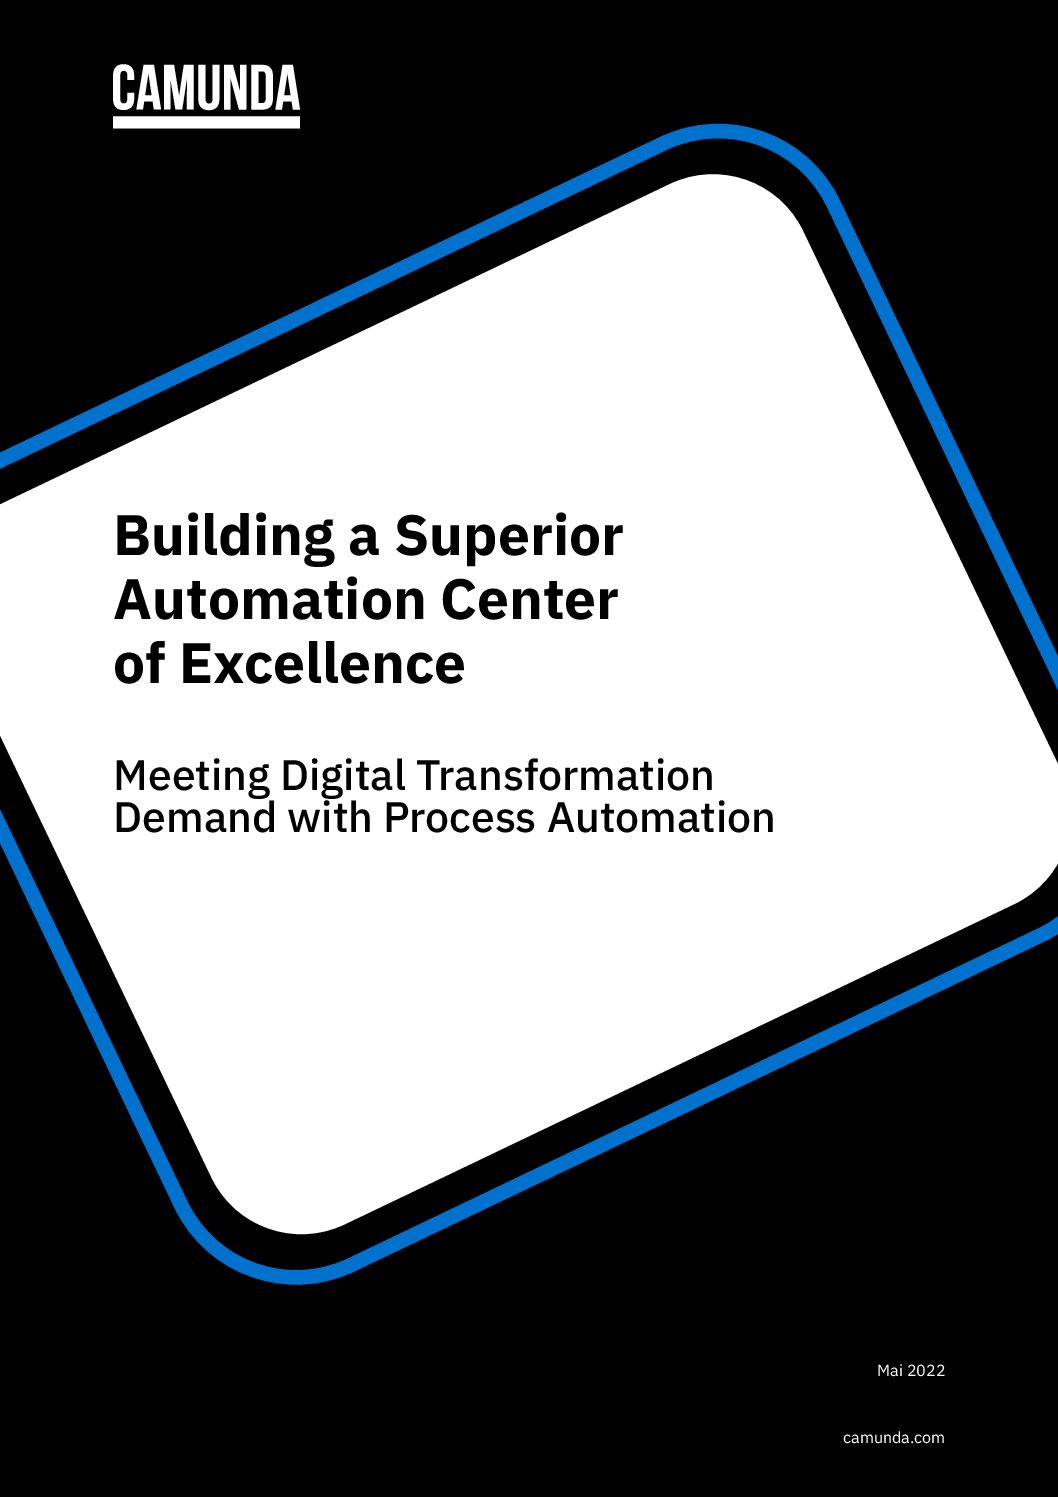 Building a Superior Automation Center of Excellence